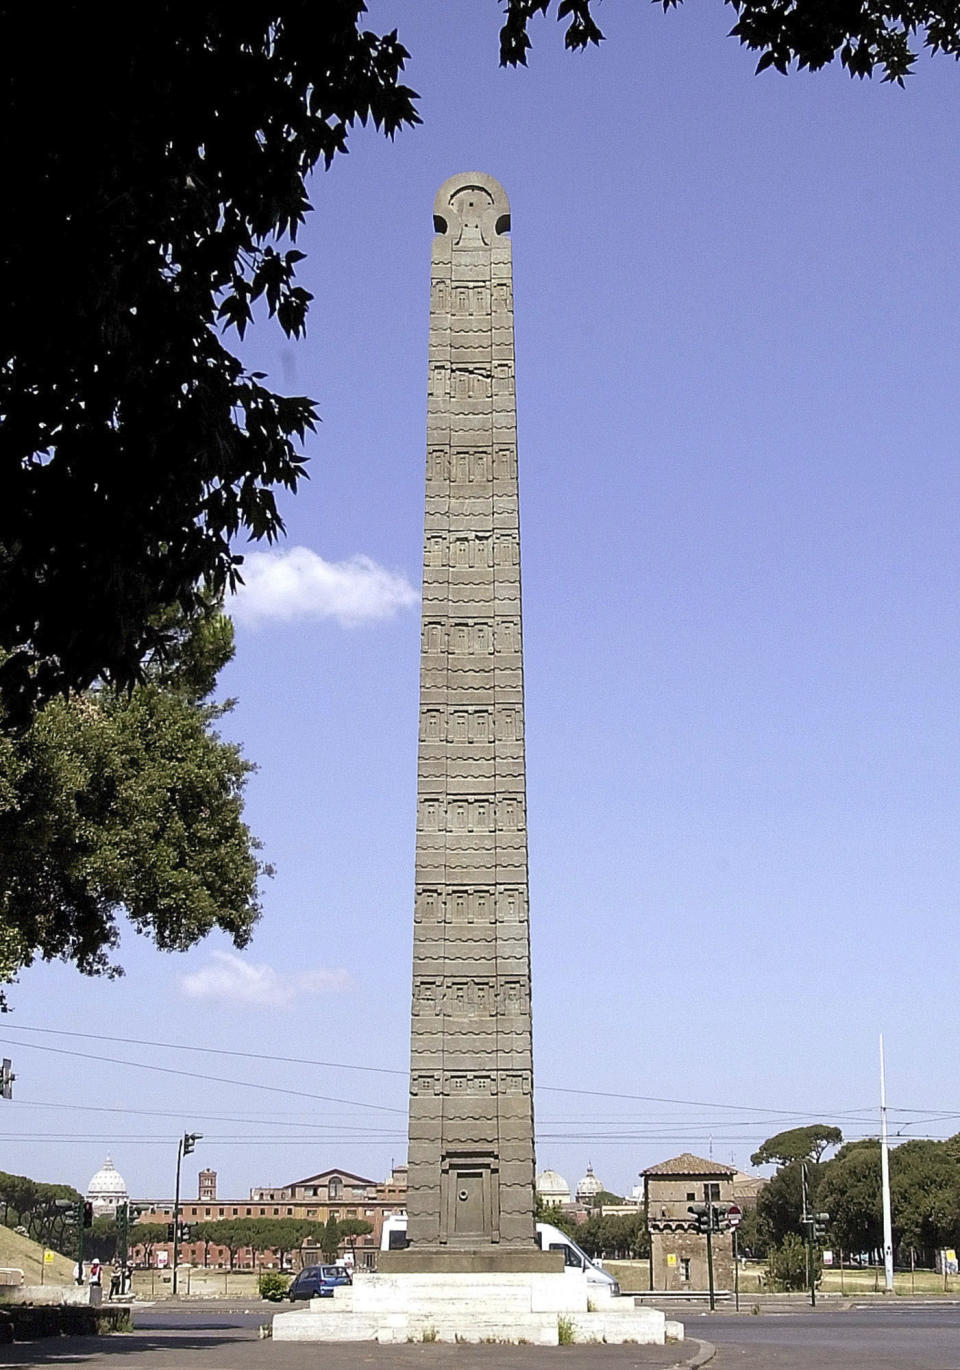 FILE - The 1,000-year-old obelisk of Axum, which was brought to Italy after Fascist dictator Benito Mussolini's 1937 invasion of Ethiopia, stands upright in the heart of downtown Rome, Saturday, July 21, 2001. Italy, a long time victim of antiquities theft that has worked for decades to recover its treasures, is coming to terms with the fact that it, too has stolen loot in its museum collections: the relics of a brutal colonial empire that the country hasn't fully reckoned with. (AP Photo/Plinio Lepri, File)